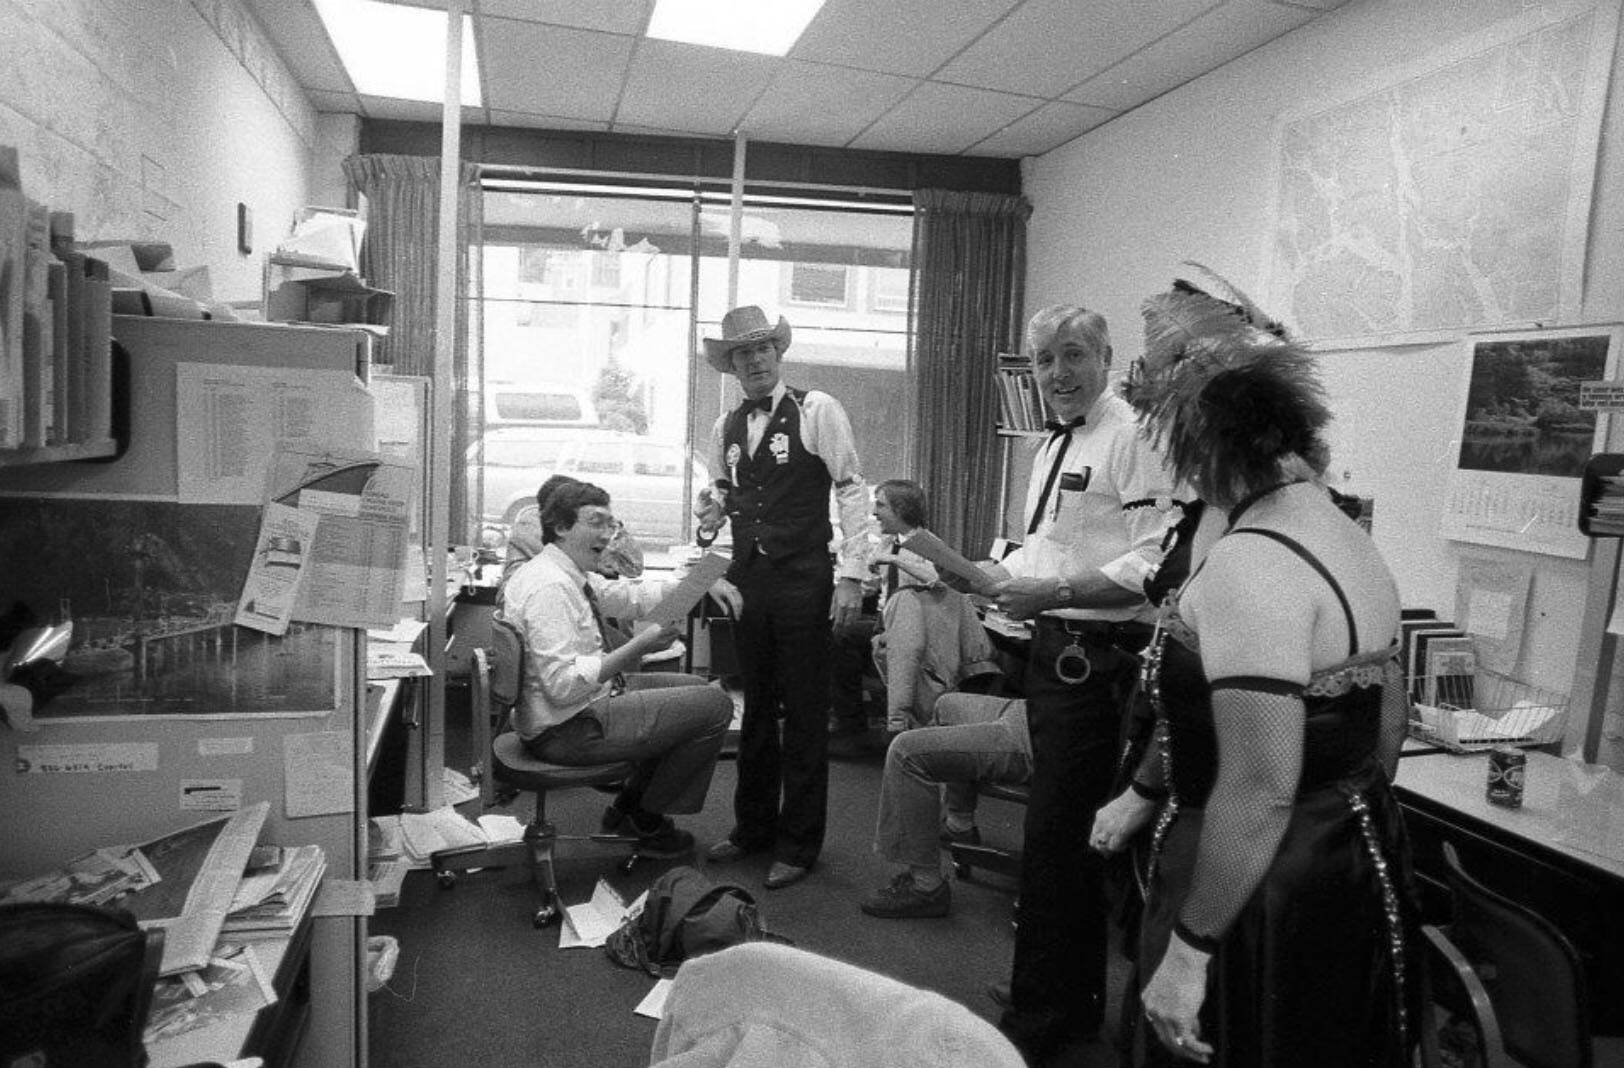 Then-managing editor of the Juneau Empire Carl Sampson (seated left) holds a warrant for his “arrest” by the Juneau Slammer, a fundraiser on June 22, 1984. The Empire was located in the AELP building with its entrance on Second Street during the 1980s. (Photo by Brian Wallace)